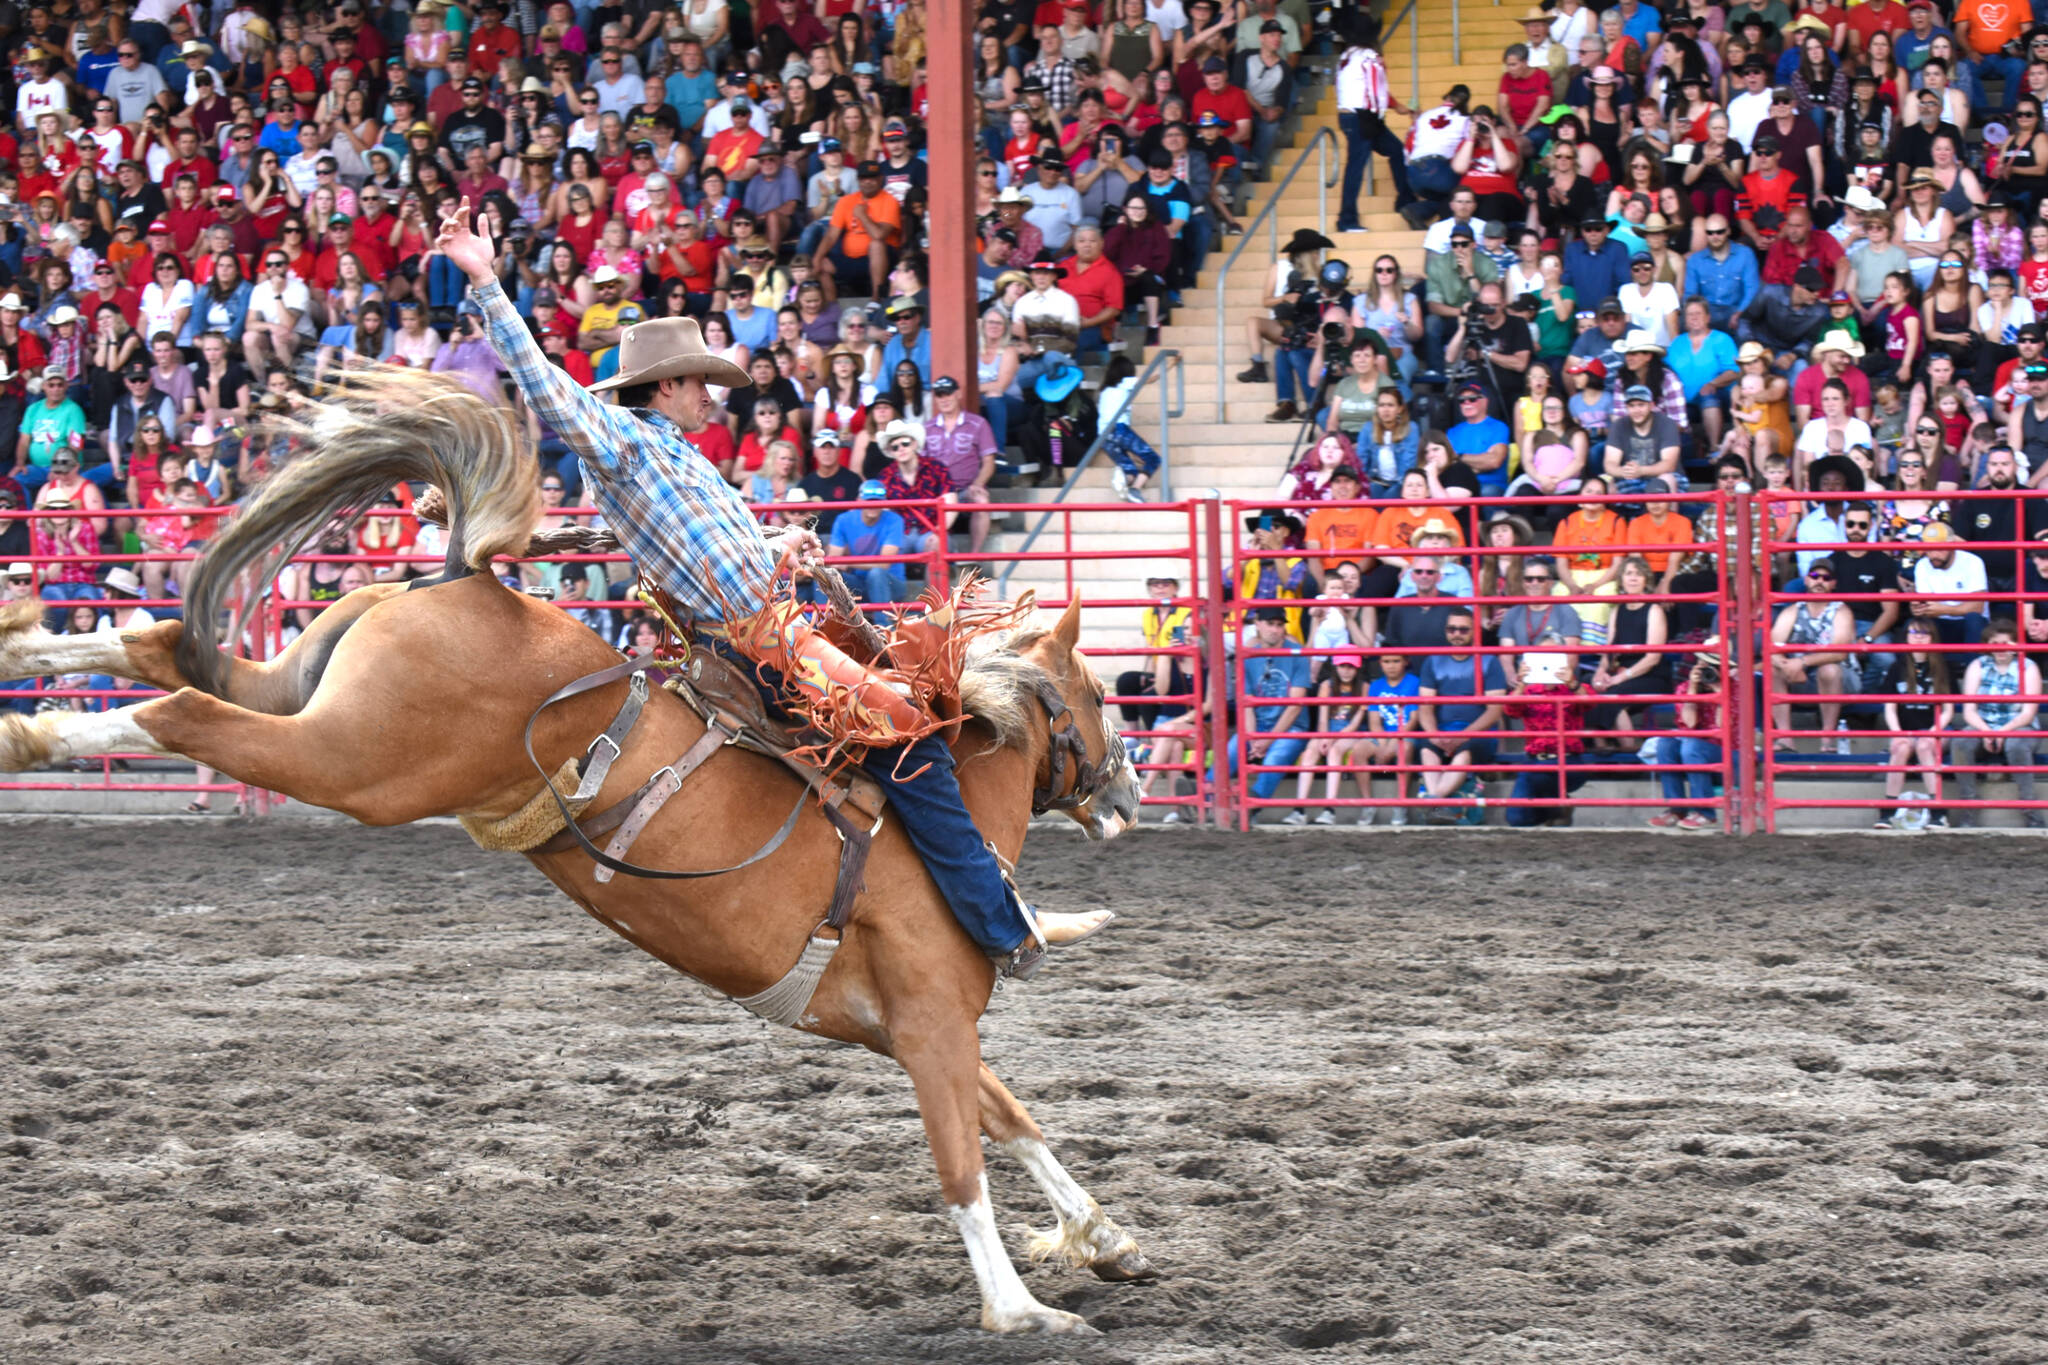 The annual Williams Lake Stampede was back to having a full house after two years of restrictions. (Angie Mindus photo - Williams Lake Tribune)